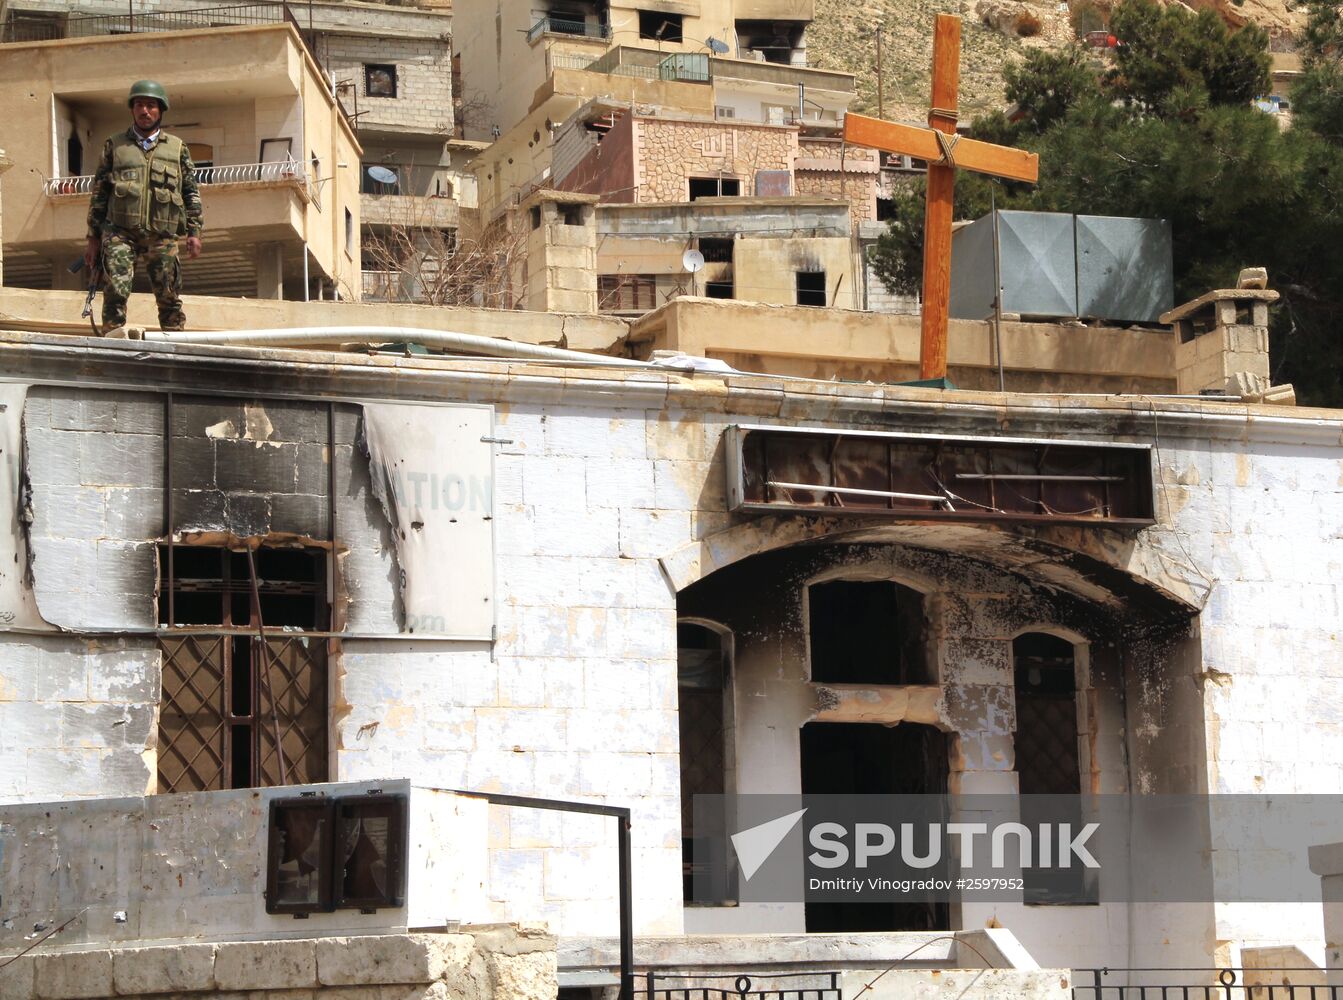 Situation in Maaloula, Syria